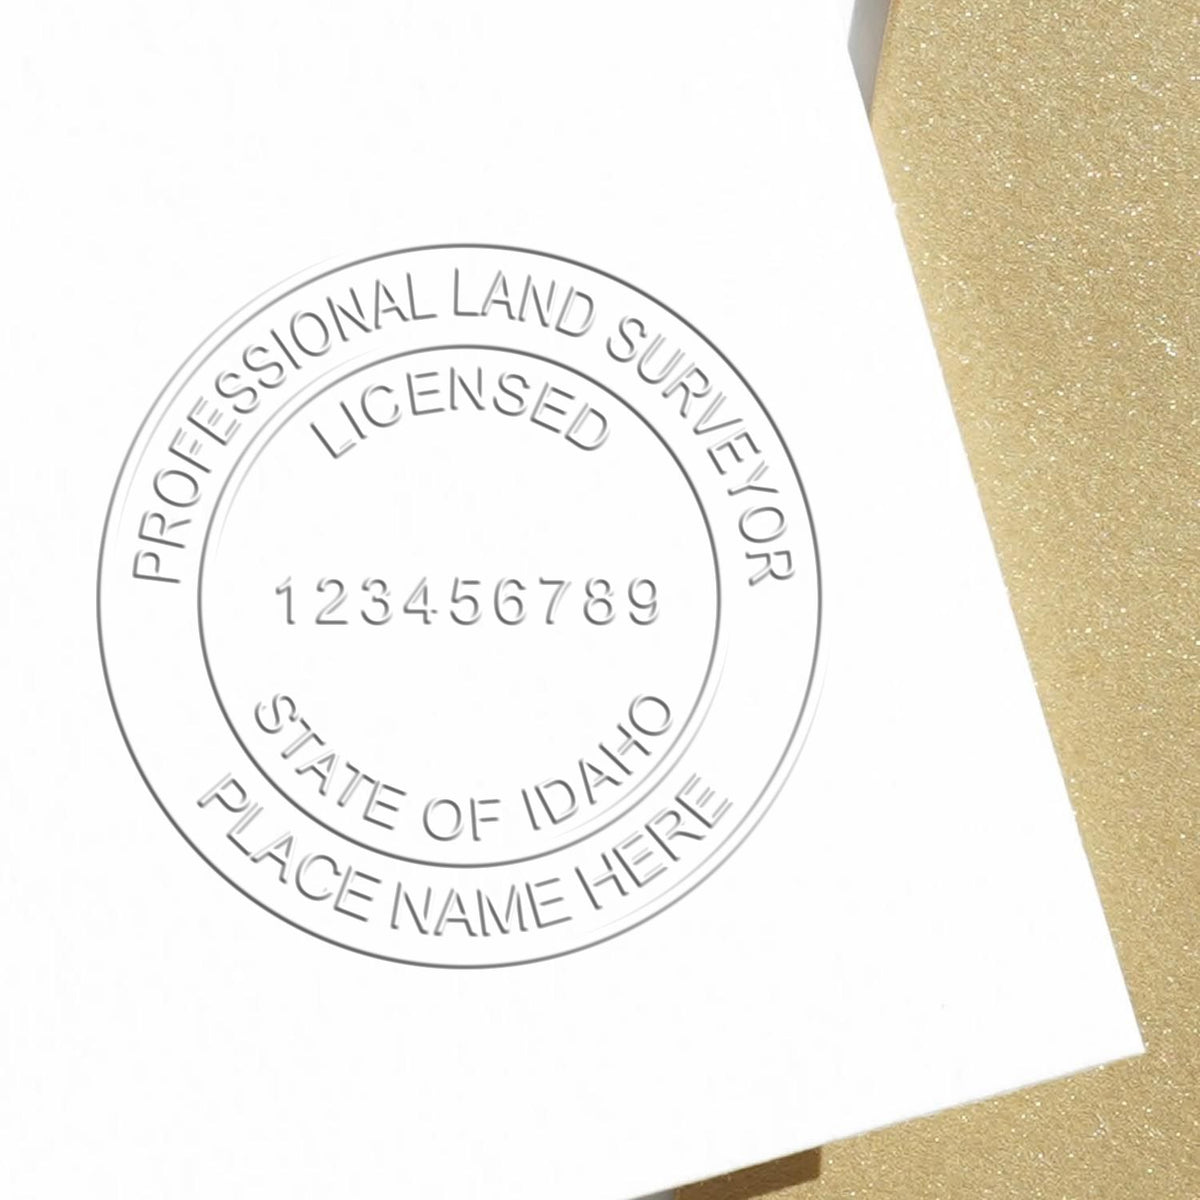 A stamped impression of the Long Reach Idaho Land Surveyor Seal in this stylish lifestyle photo, setting the tone for a unique and personalized product.